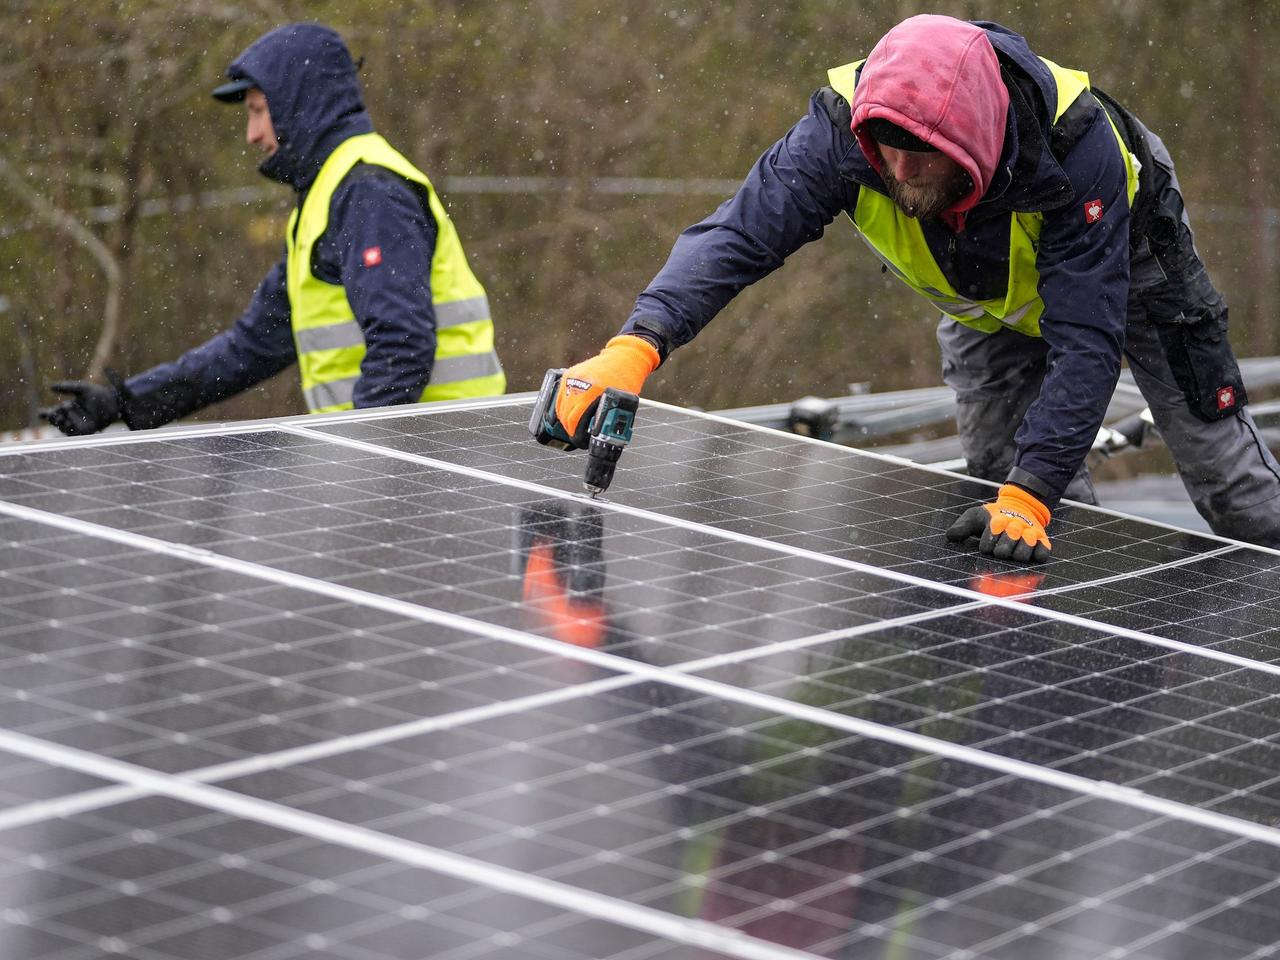 Solar panels are installed at a floating photovoltaic plant on a lake in Haltern, Germany, Friday, April 1, 2022.